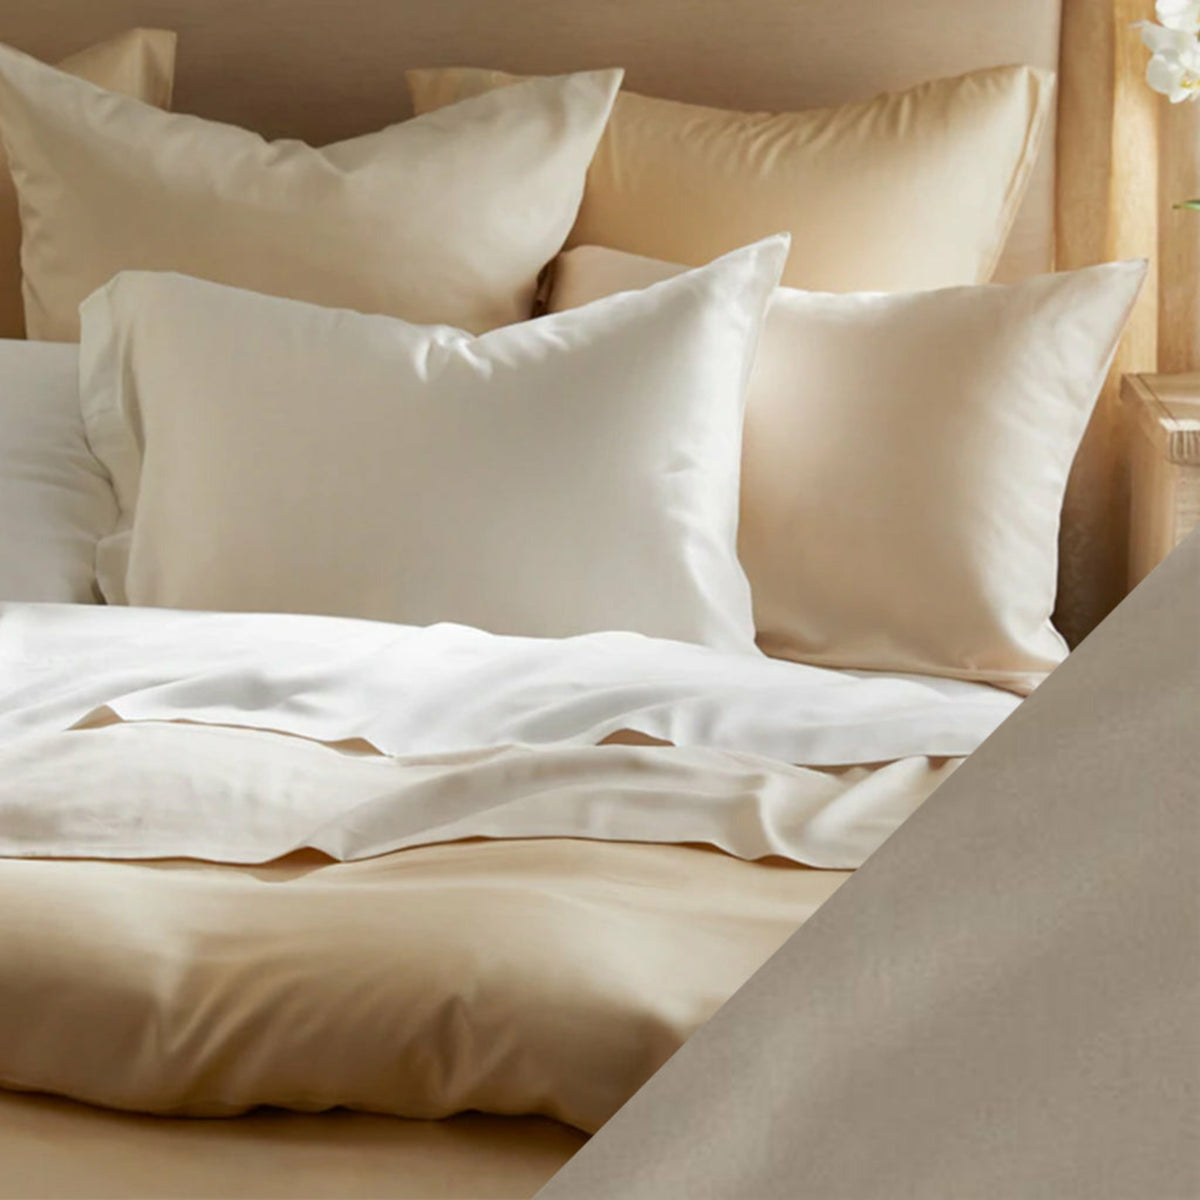 Main Lifestyle of SDH Legna Classic Bedding with Swatch of Flax